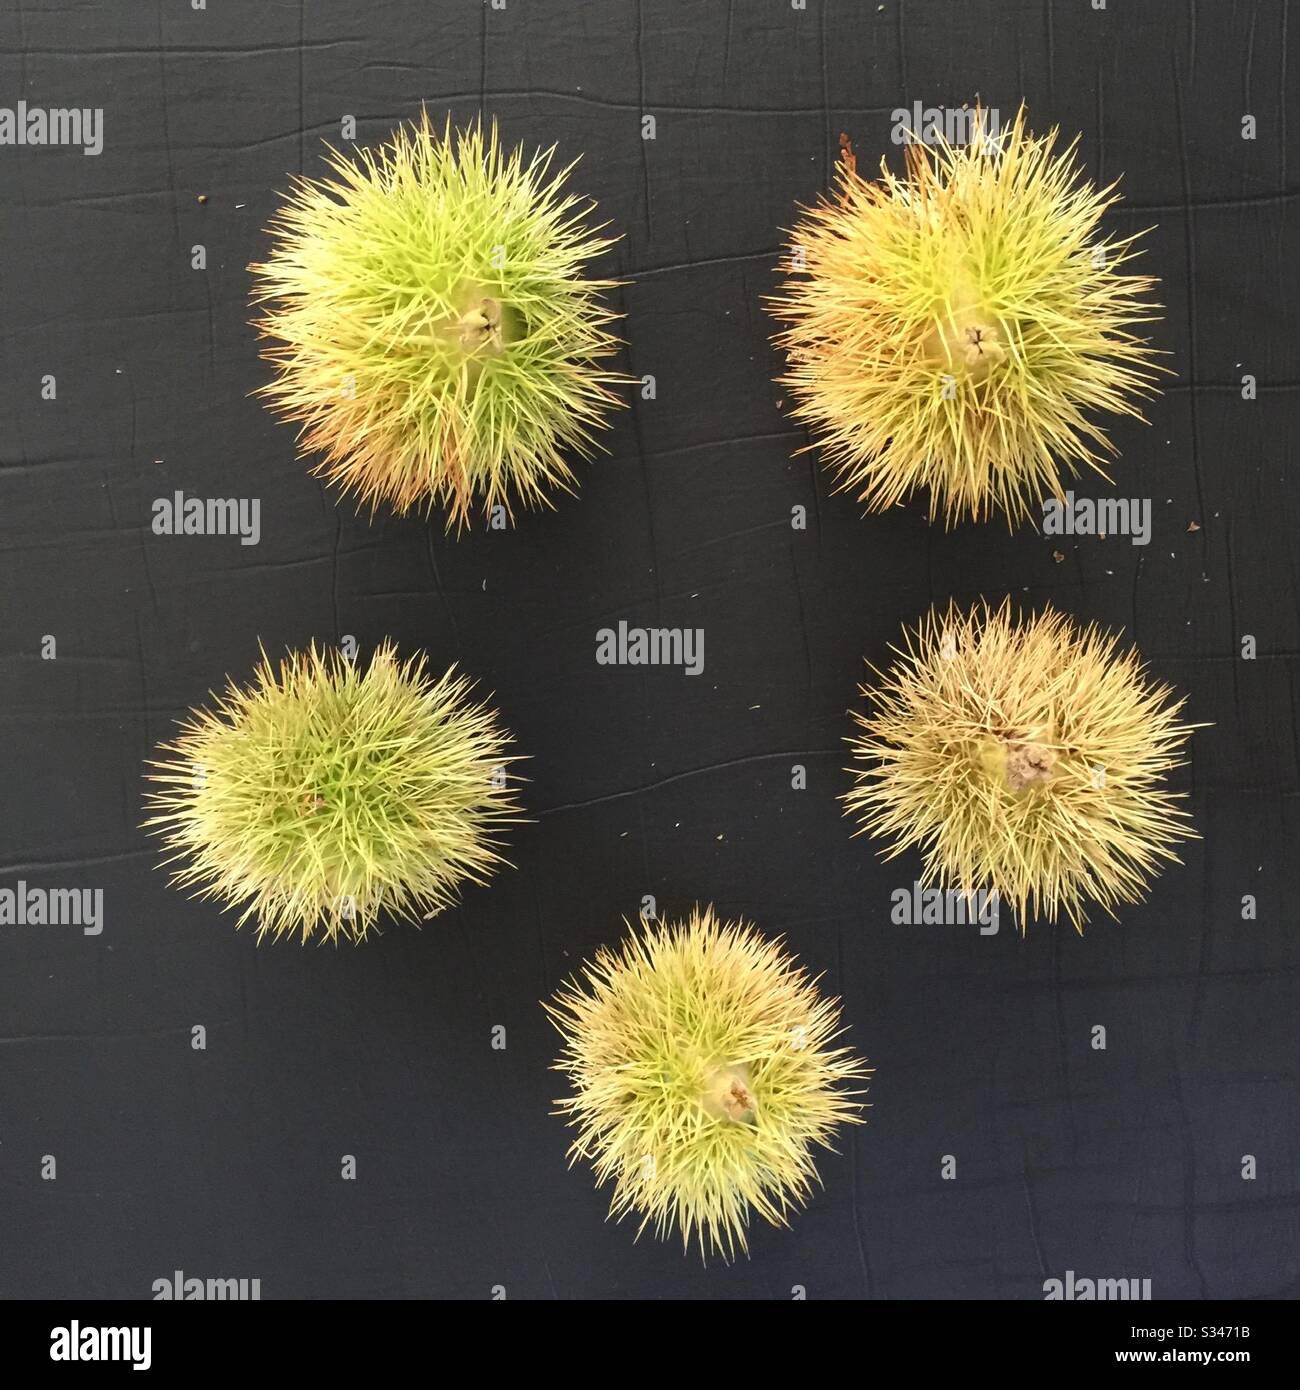 5 artistically presented spiky meddles seed heads Stock Photo